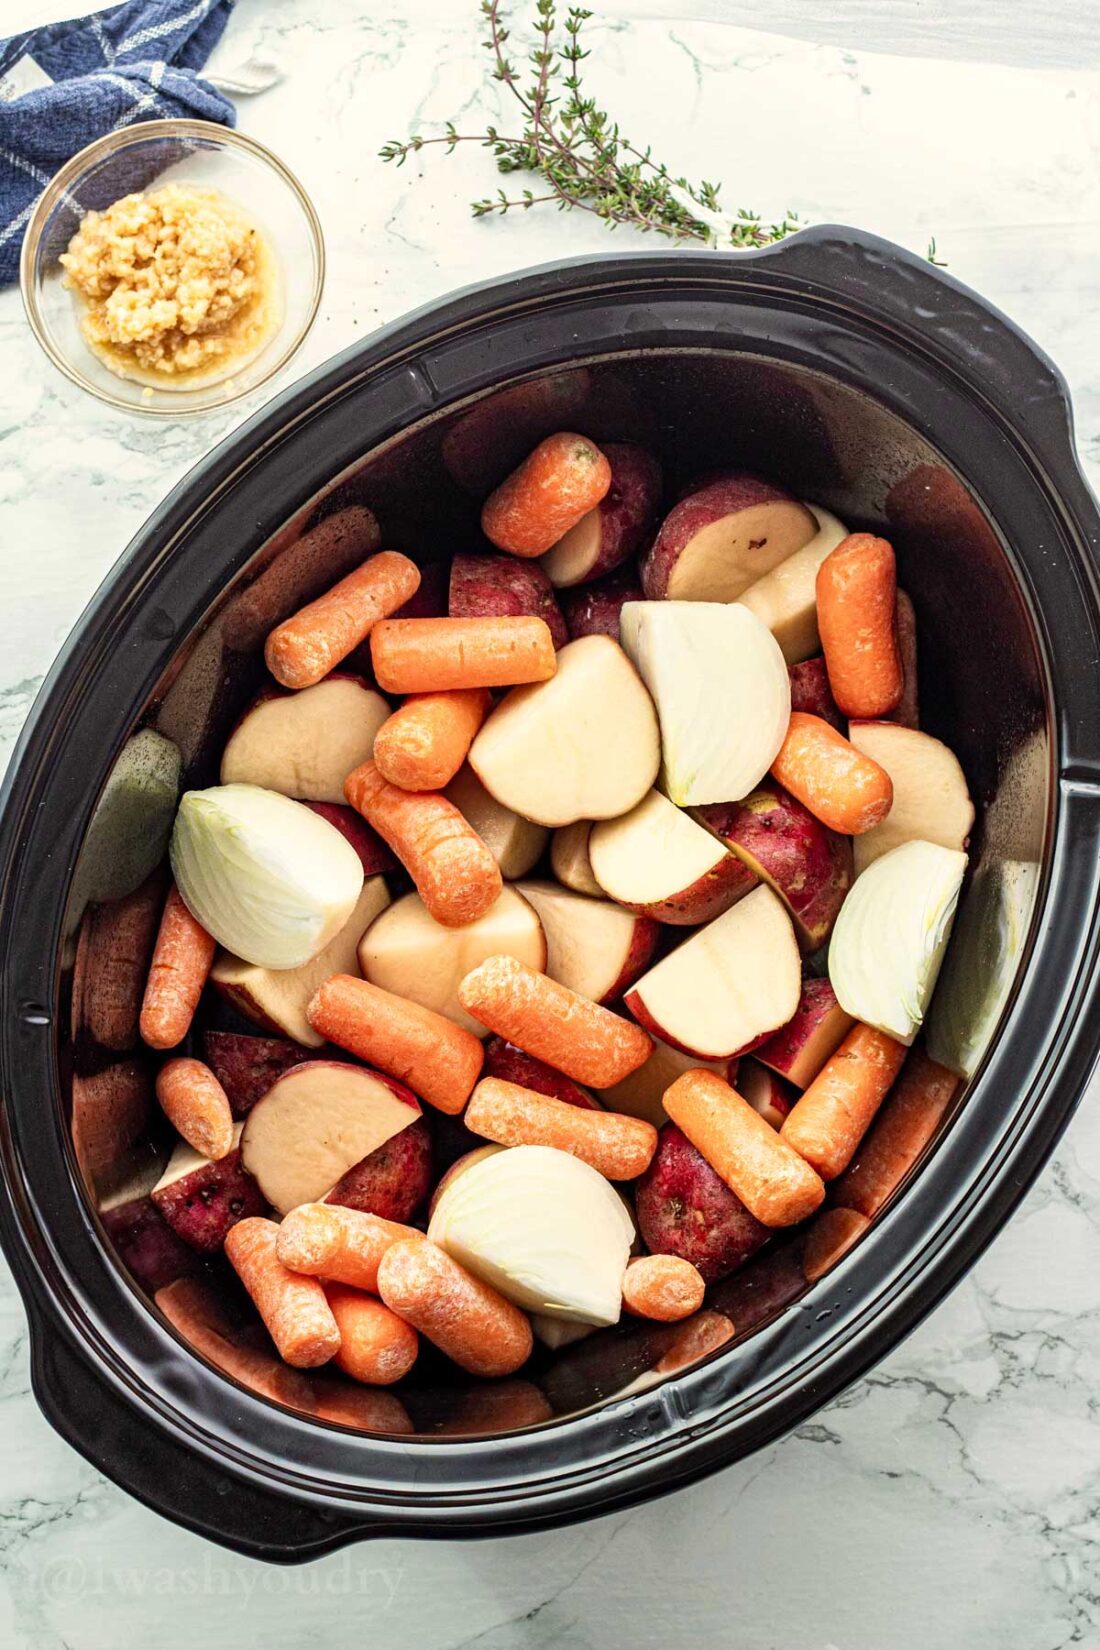 slow cooker with potatoes, carrots and onions.